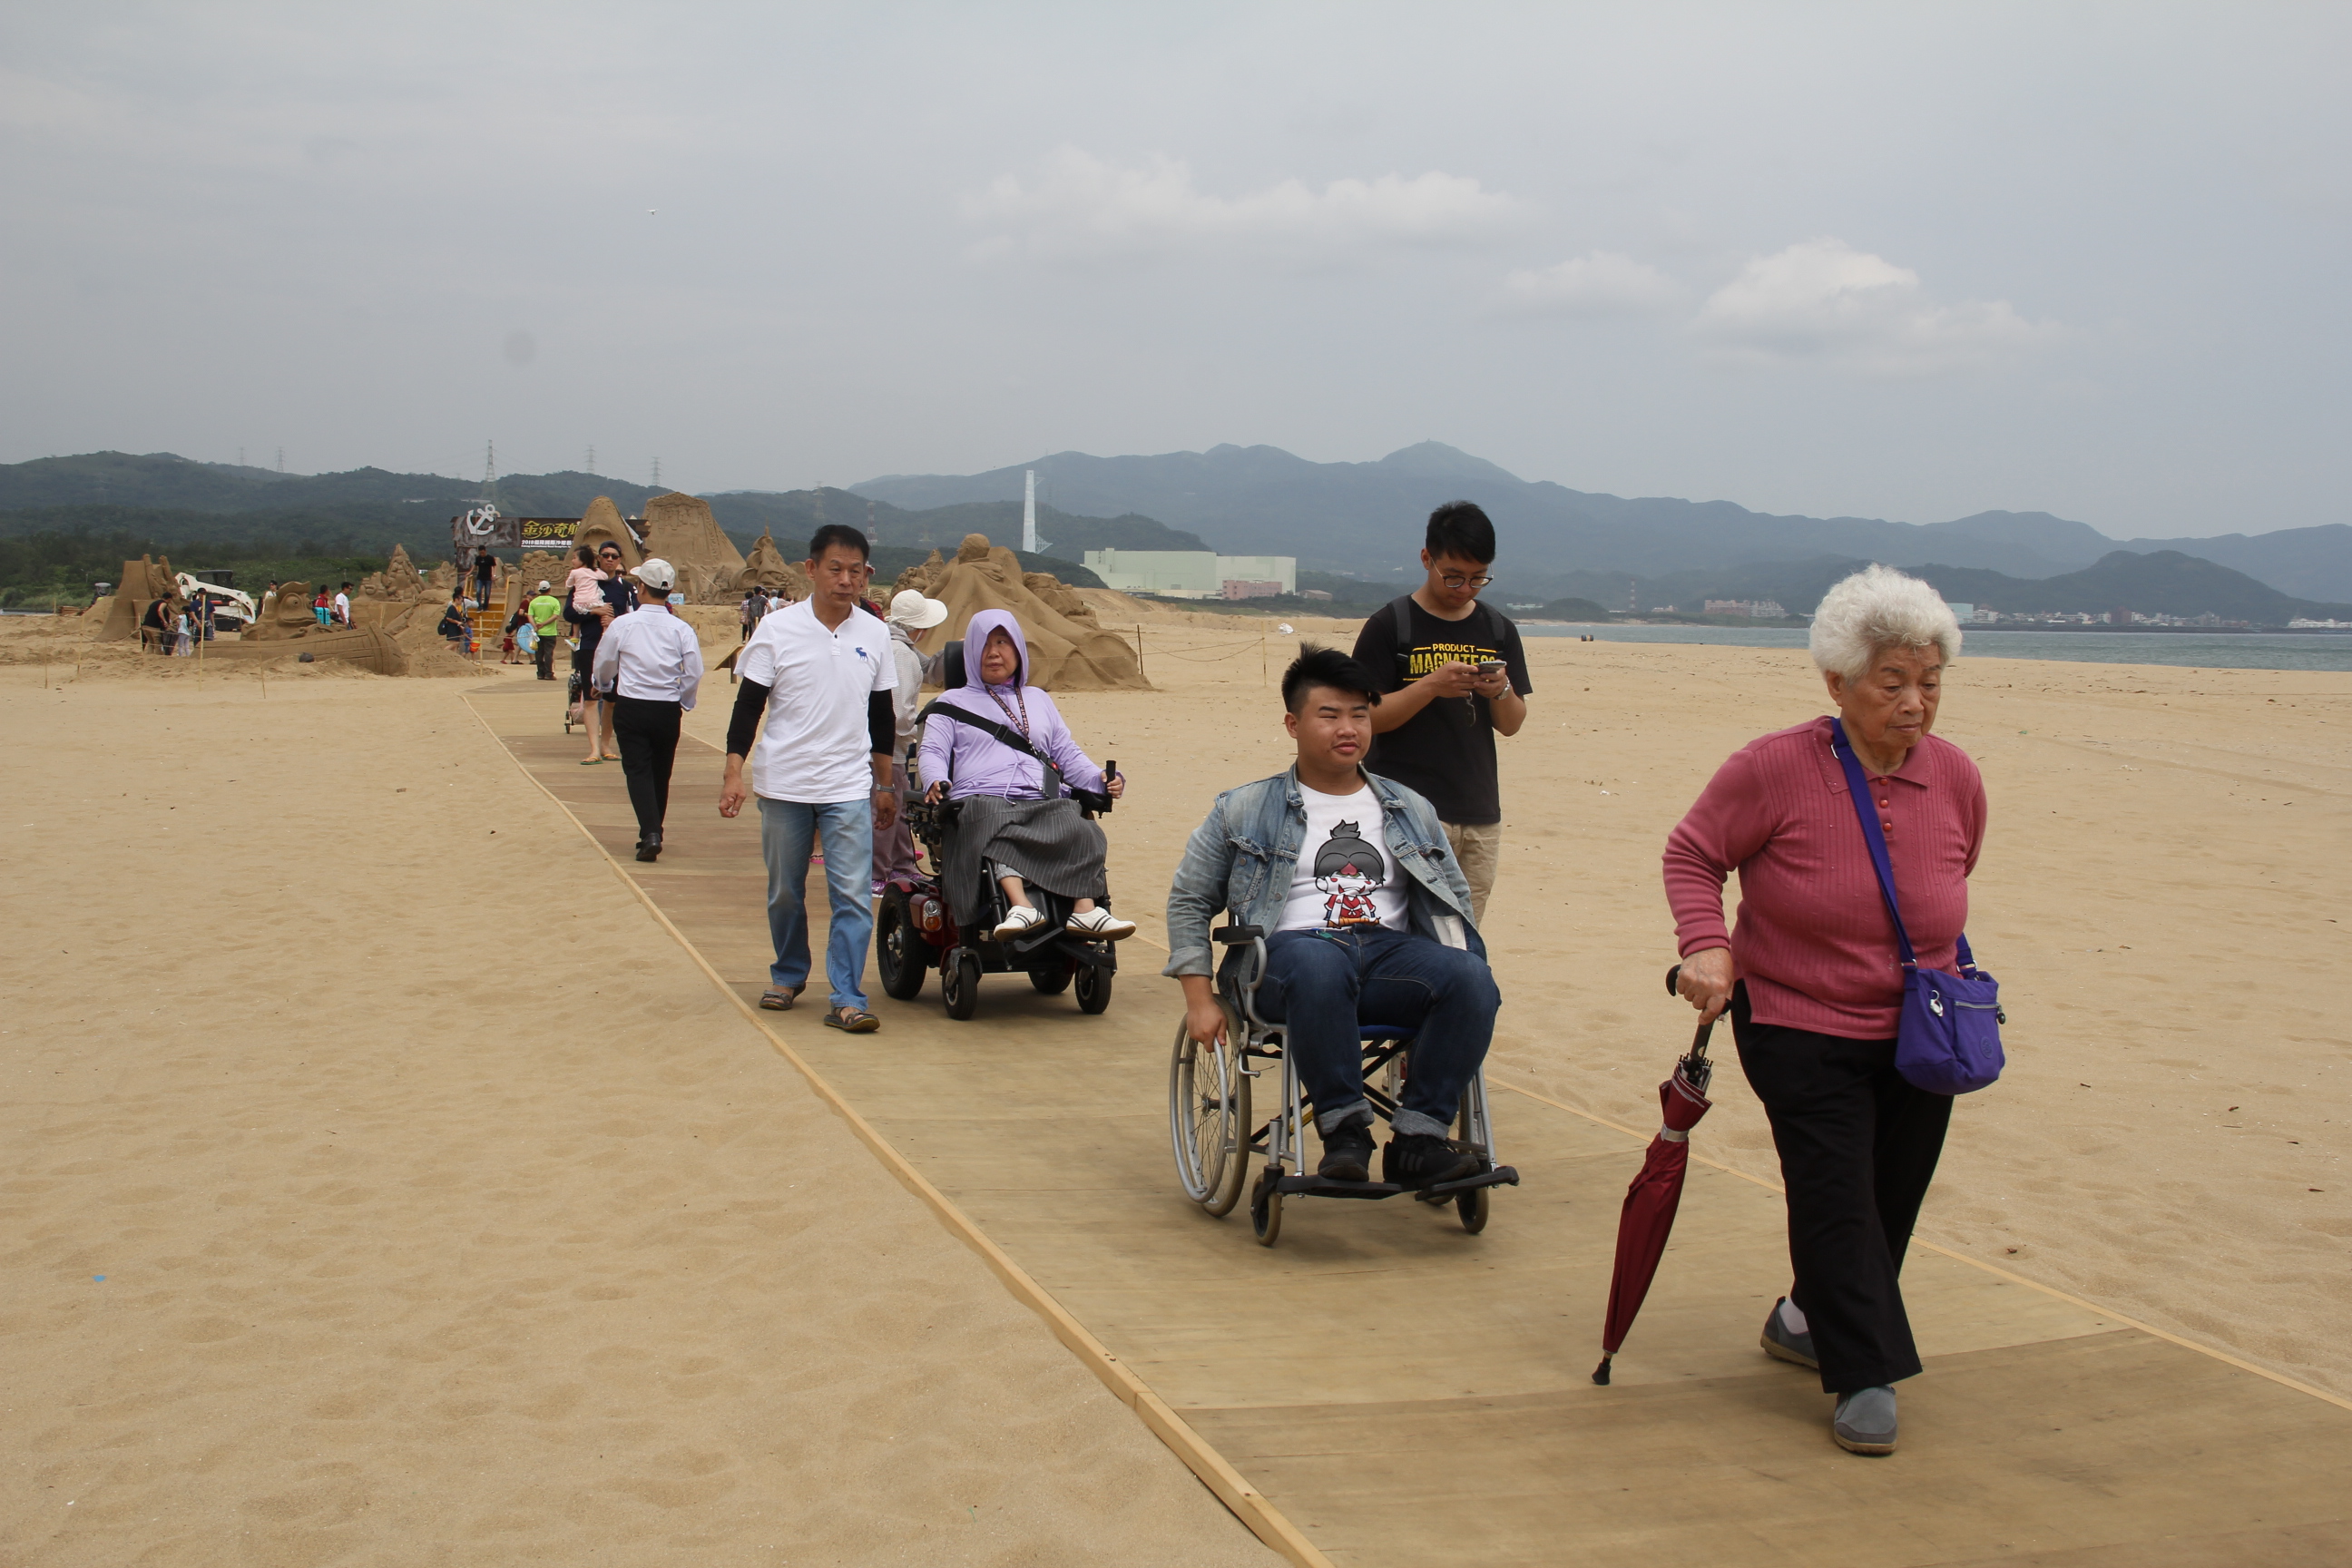 Set up barrier-free trails on the spot to be considerate of people with limited mobility